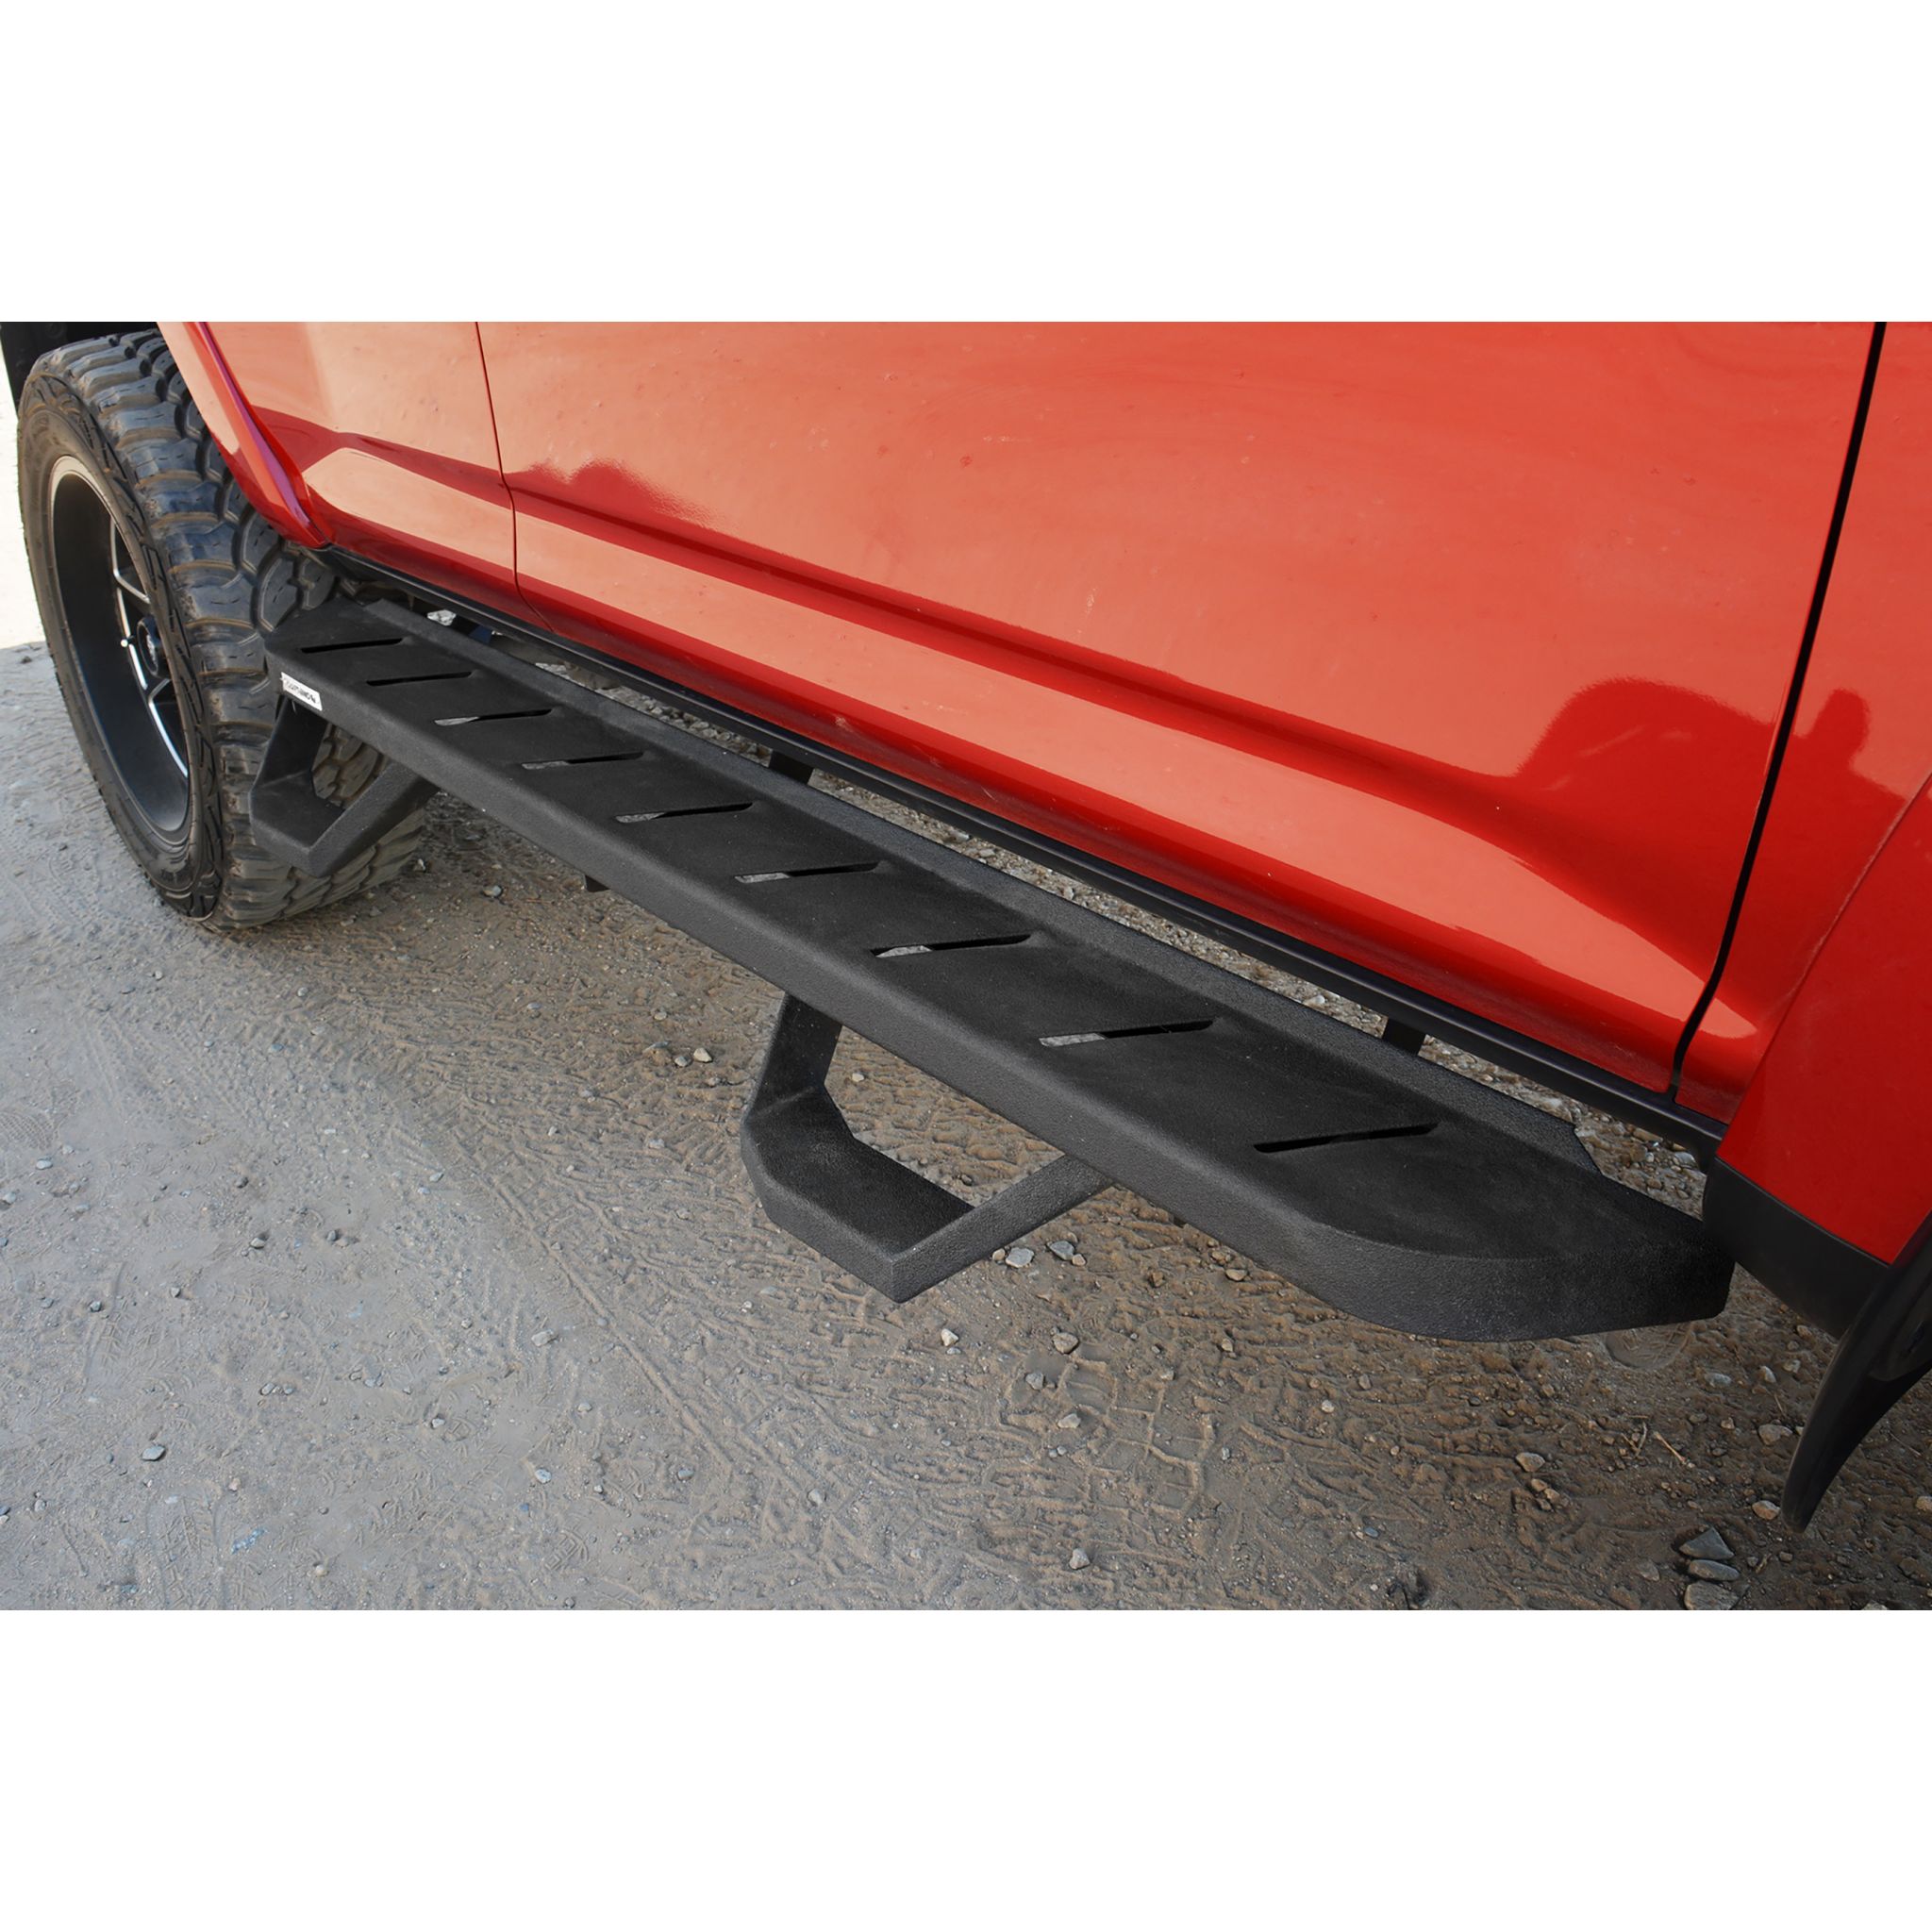 Go Rhino 6944256820T - RB20 Running Boards With Mounting Brackets & 2 Pairs of Drop Steps Kit - Protective Bedliner Coating